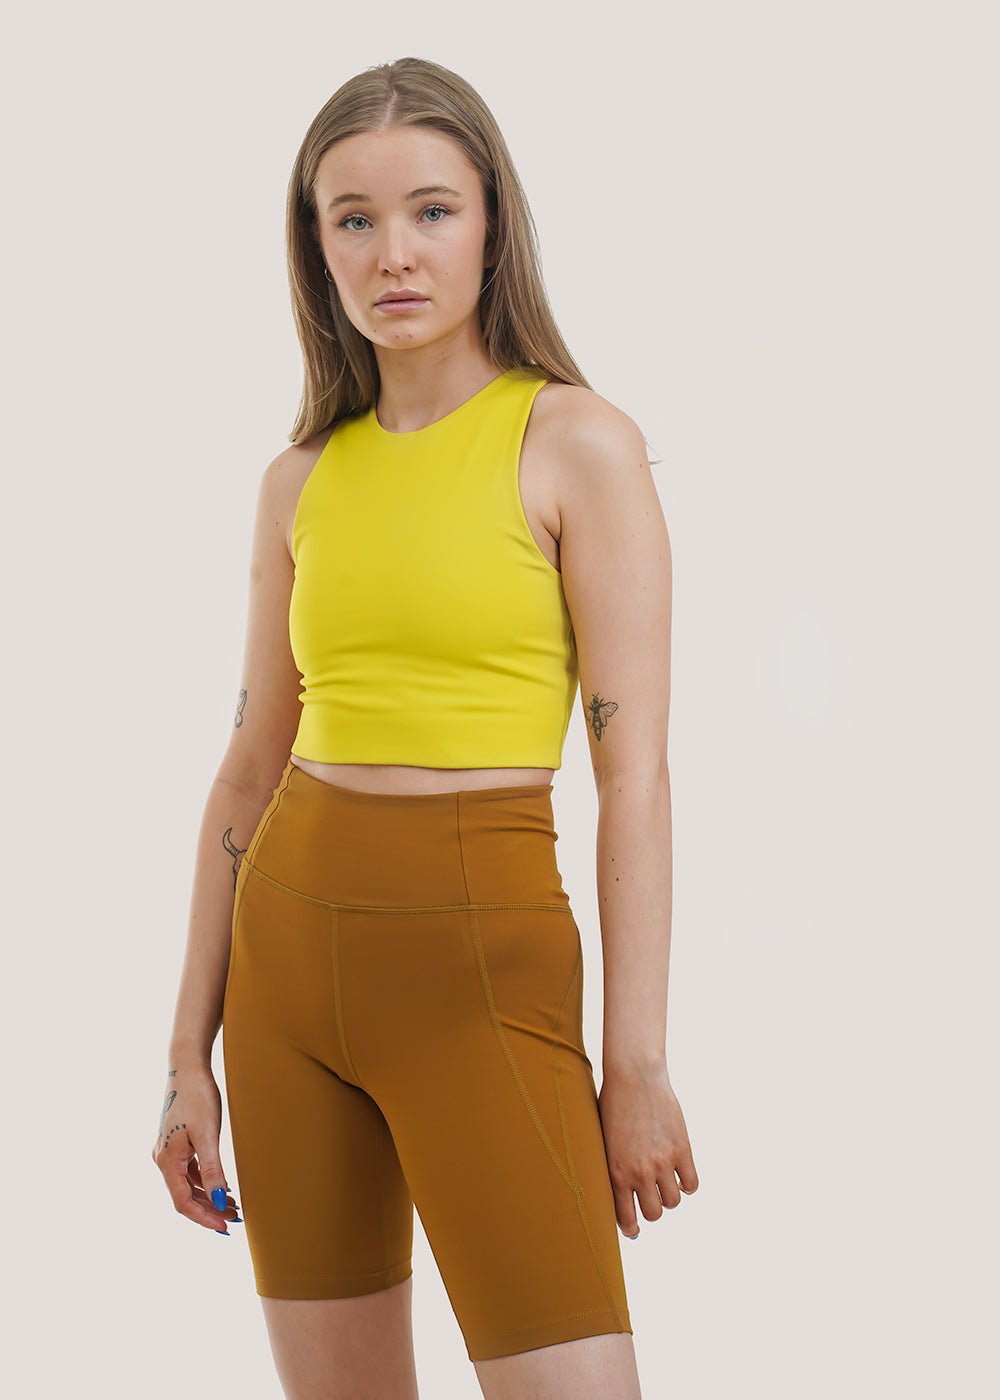 Chartreuse Dylan Bra by GIRLFRIEND COLLECTIVE – New Classics Studios